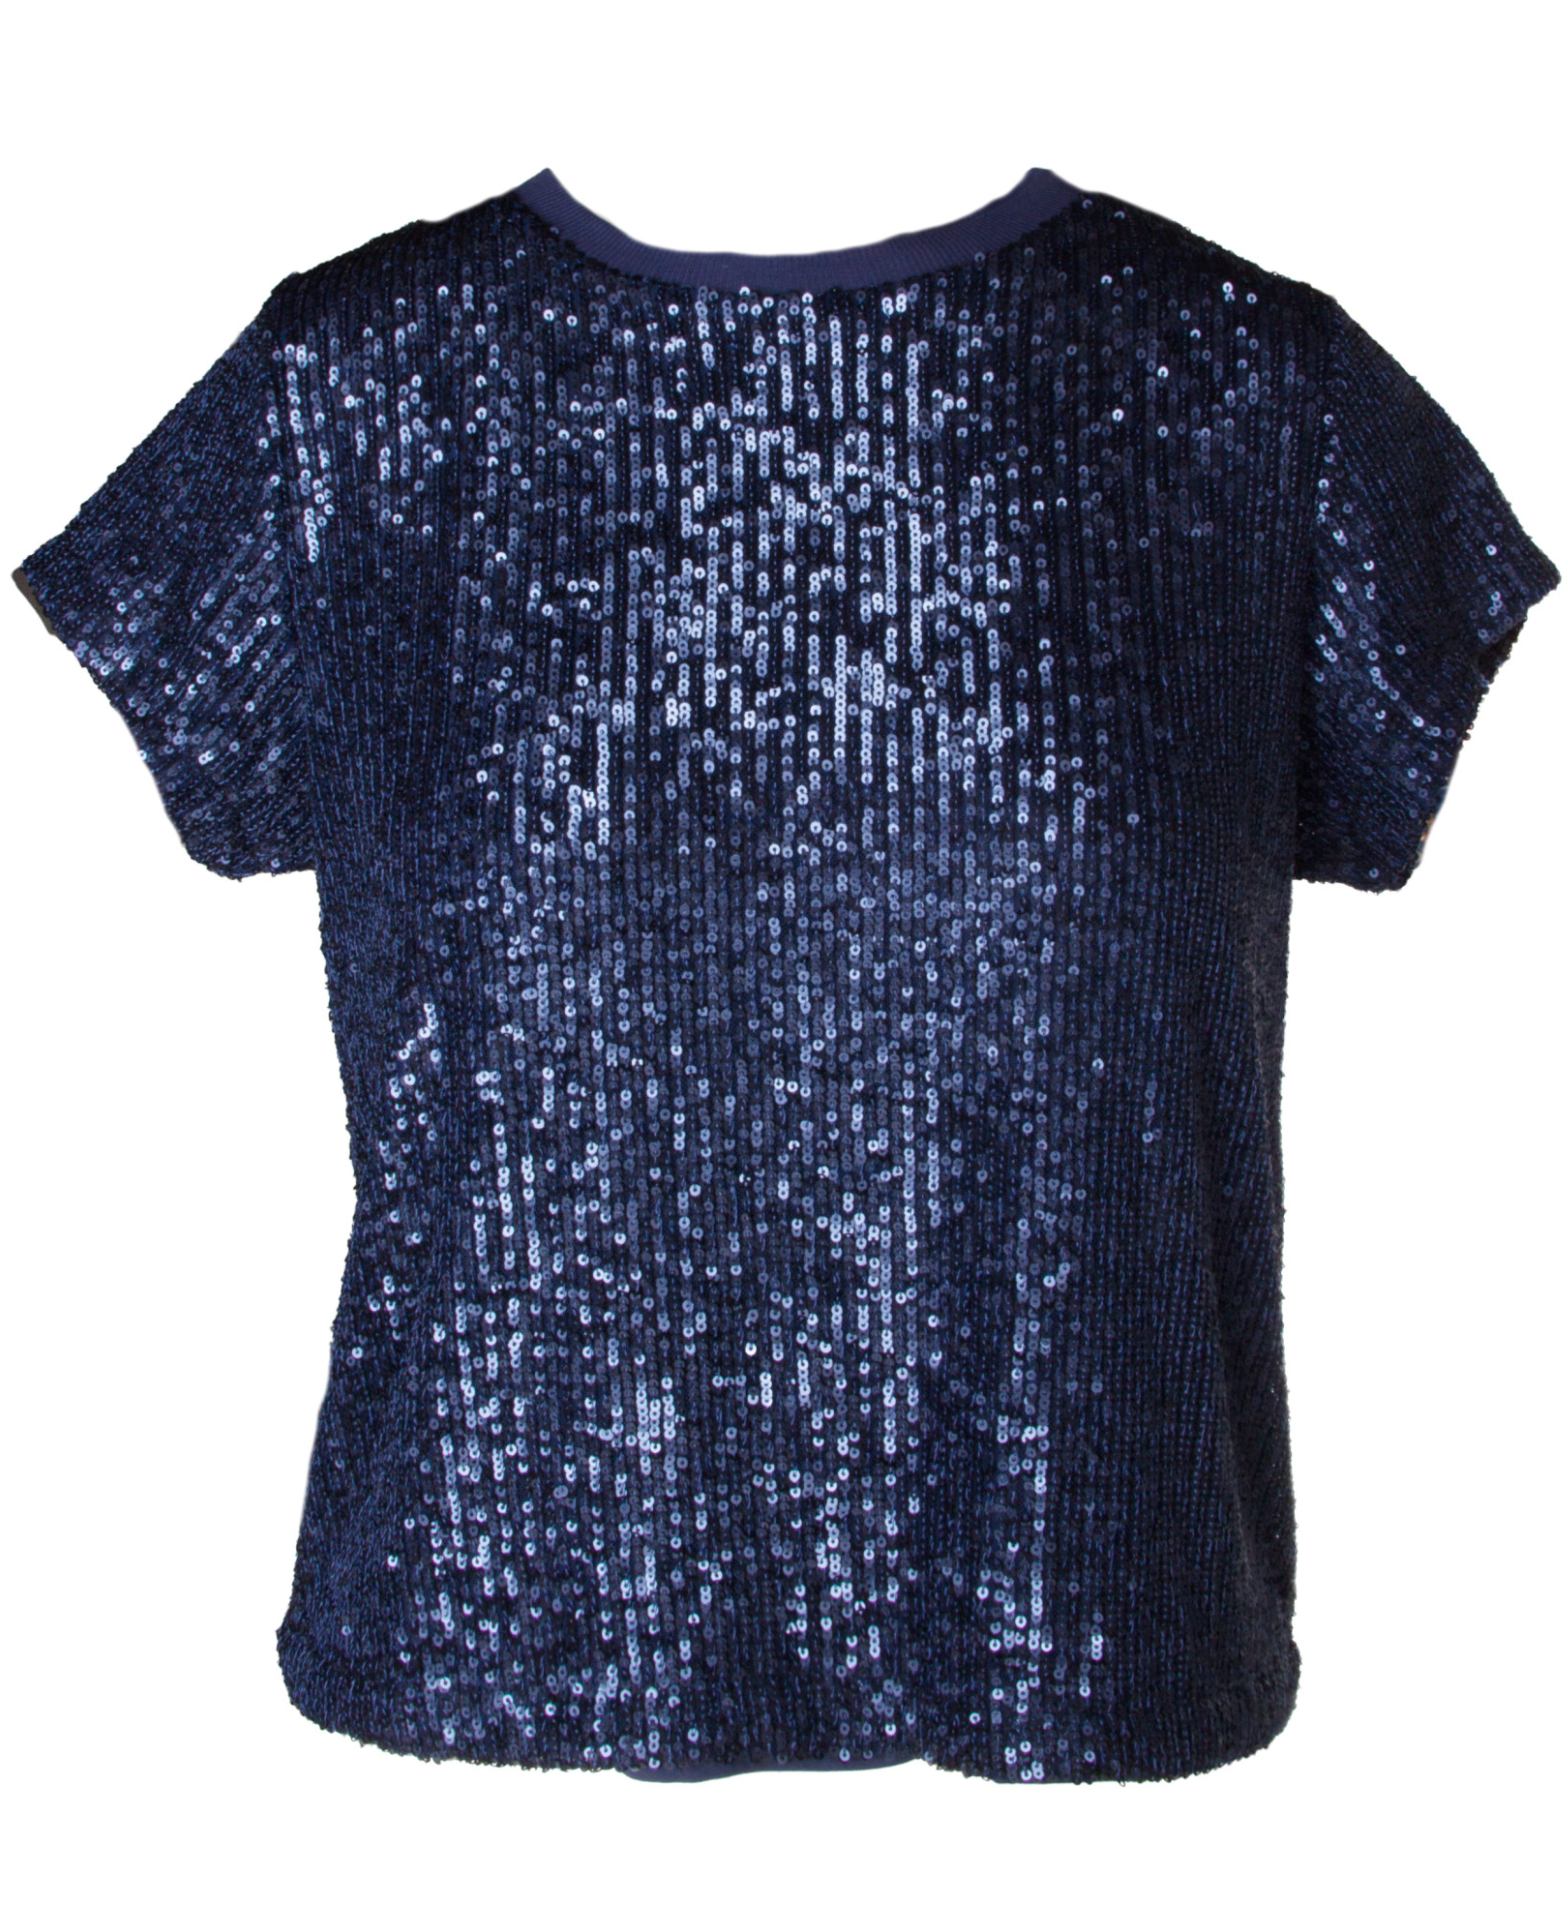 Sequin Knit Top - The French Shoppe